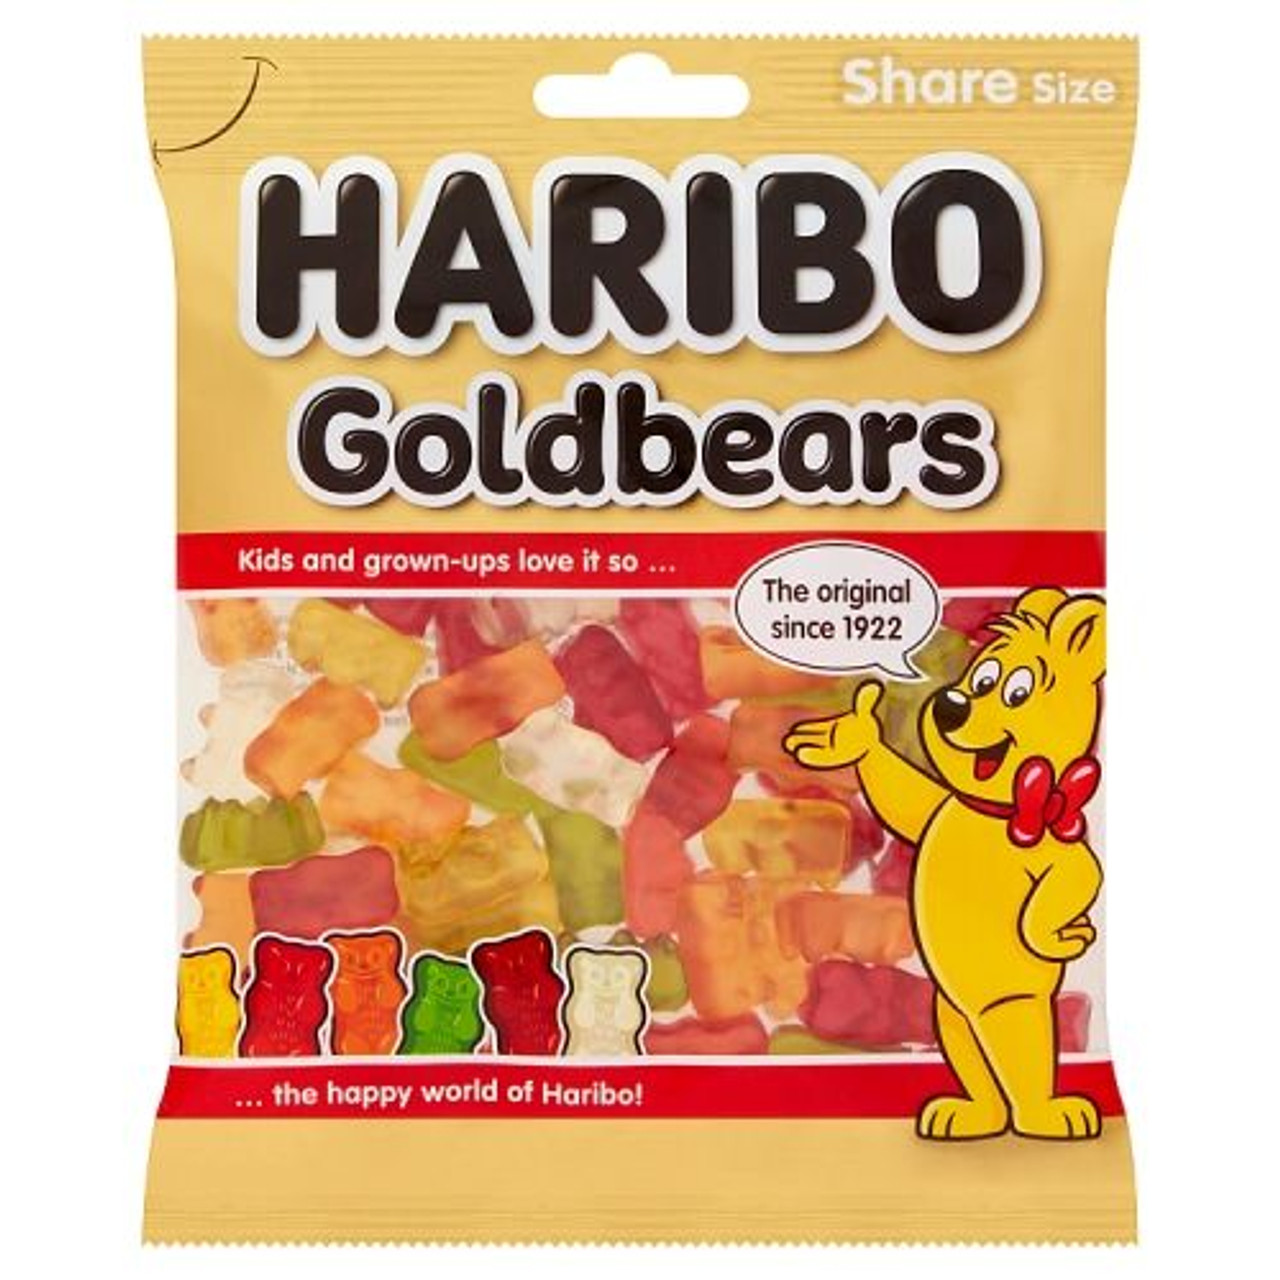 Haribo Sweets from around the World – Candy Mail UK